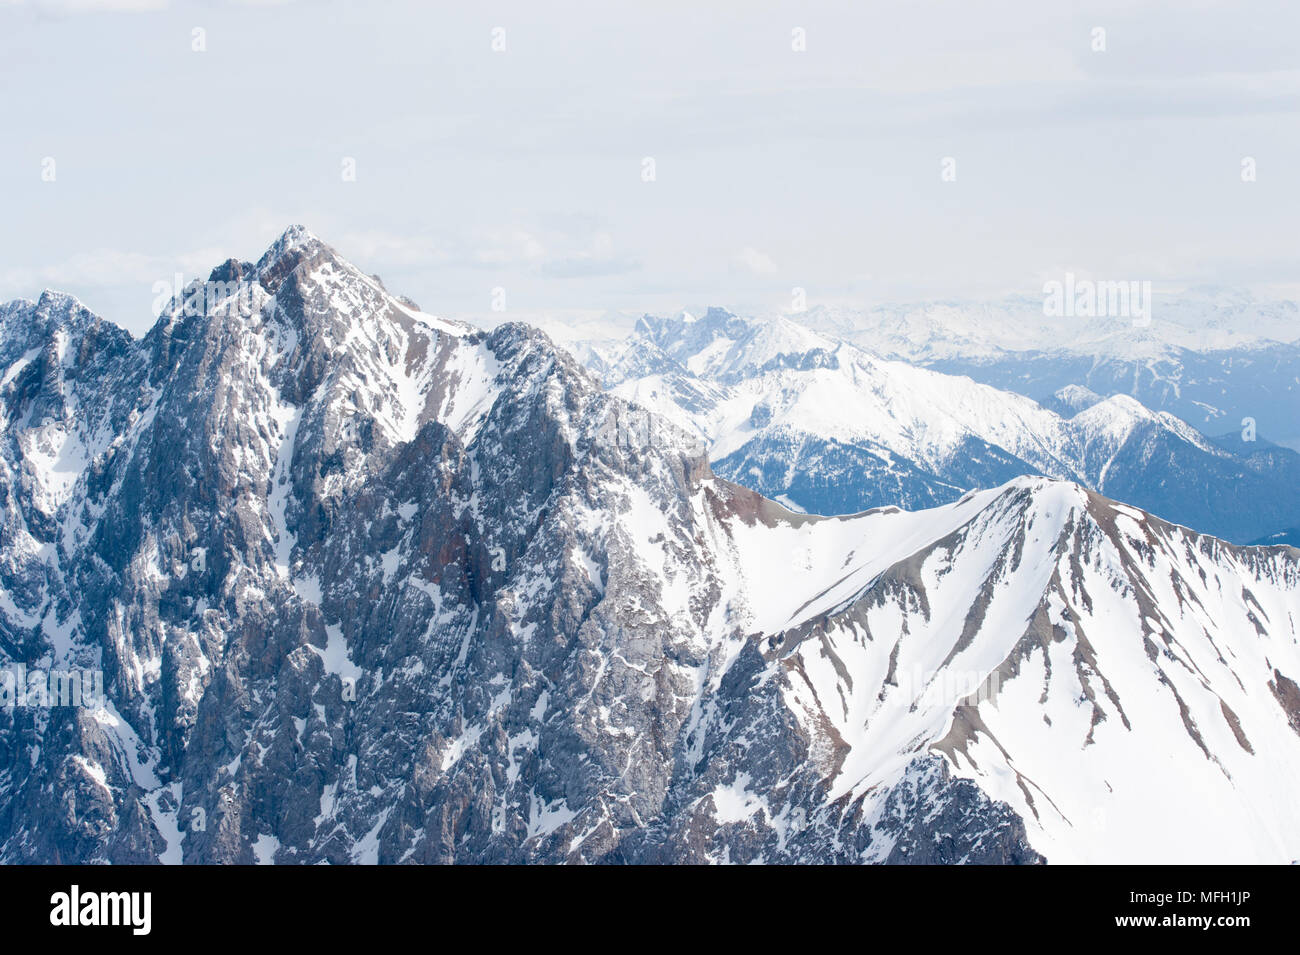 Alps mountain range viewed from Zugspitze, in Eastern Alps, which form part of the Wetterstein mountains,(German: Wettersteingebirge), Bavaria,Germany Stock Photo